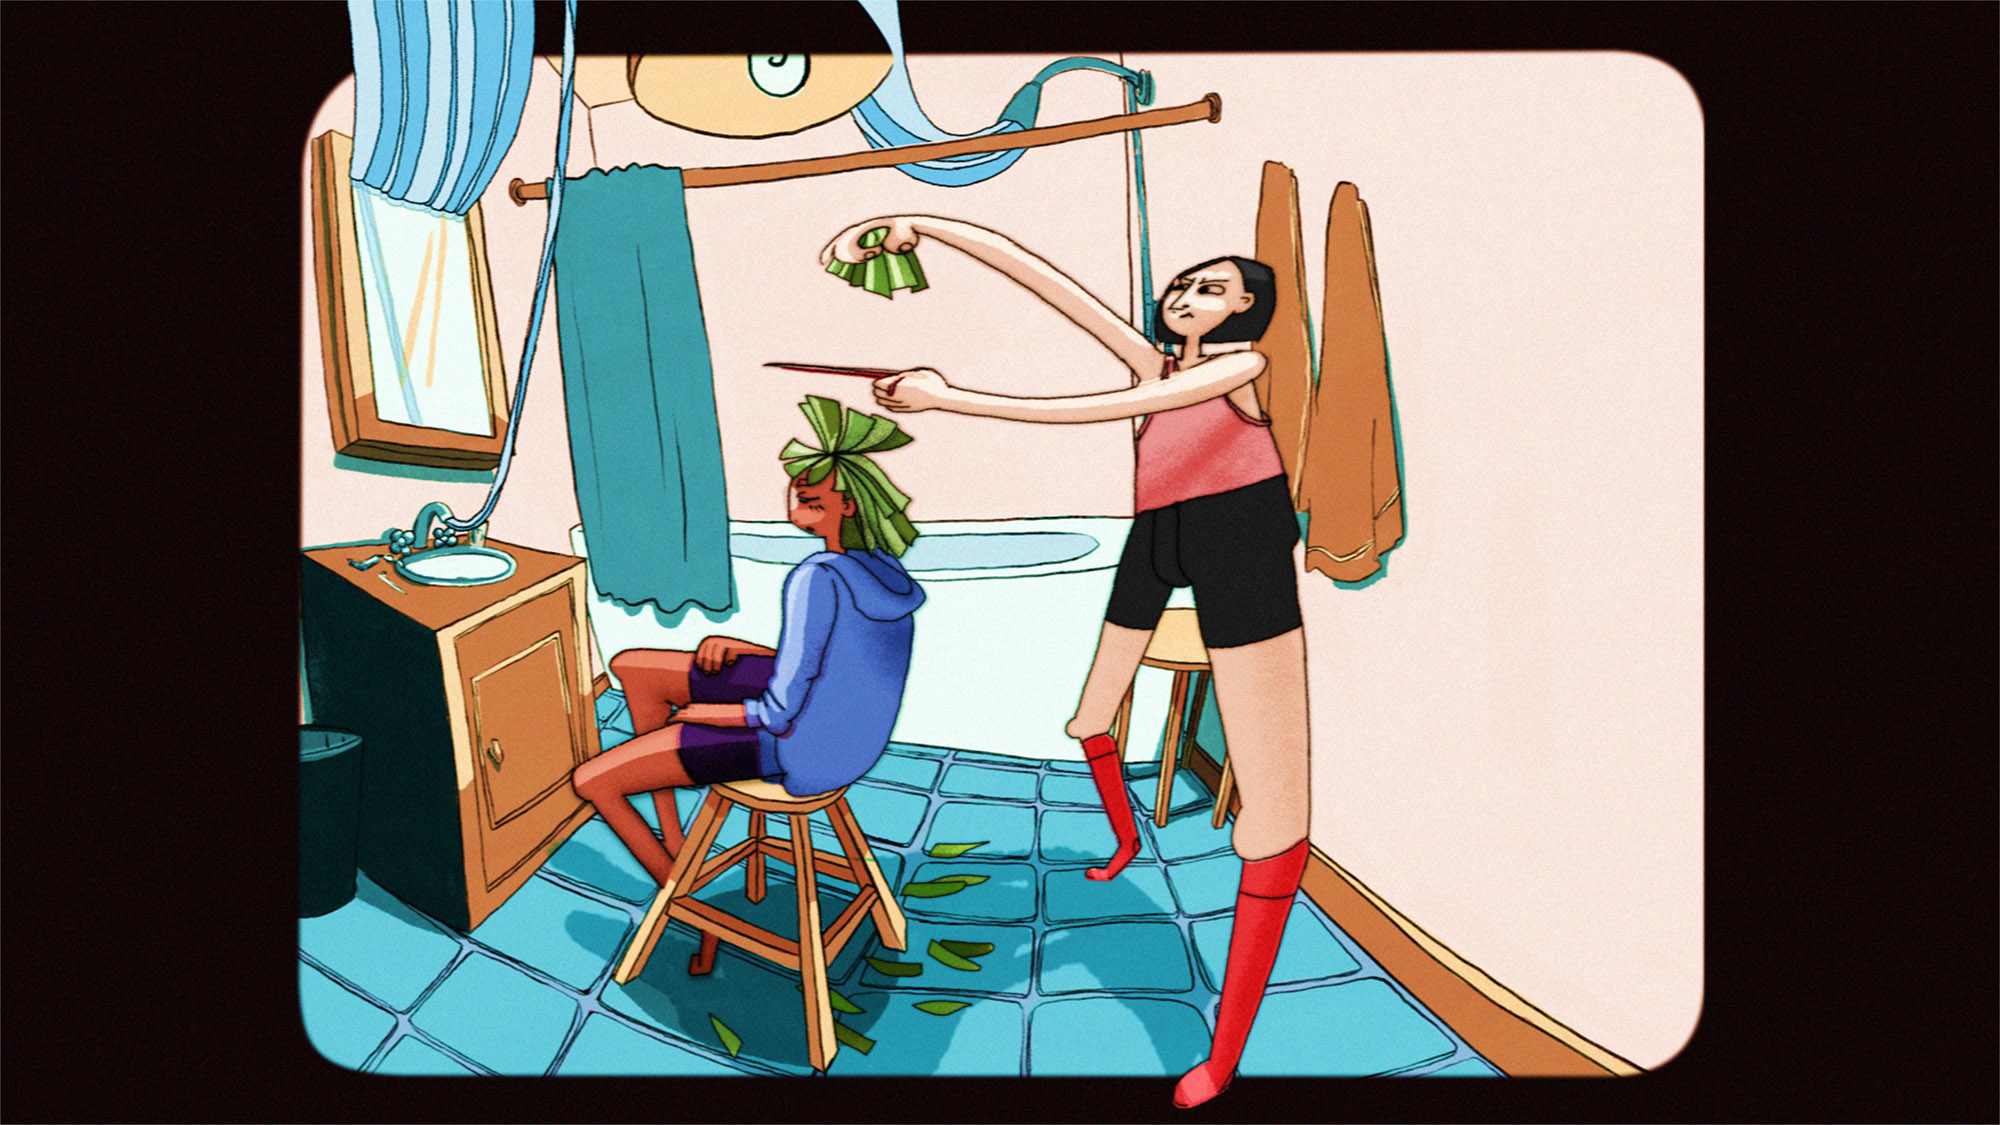 animated still with figures moving in a bathroom, possibly with one person giving the other a haircut